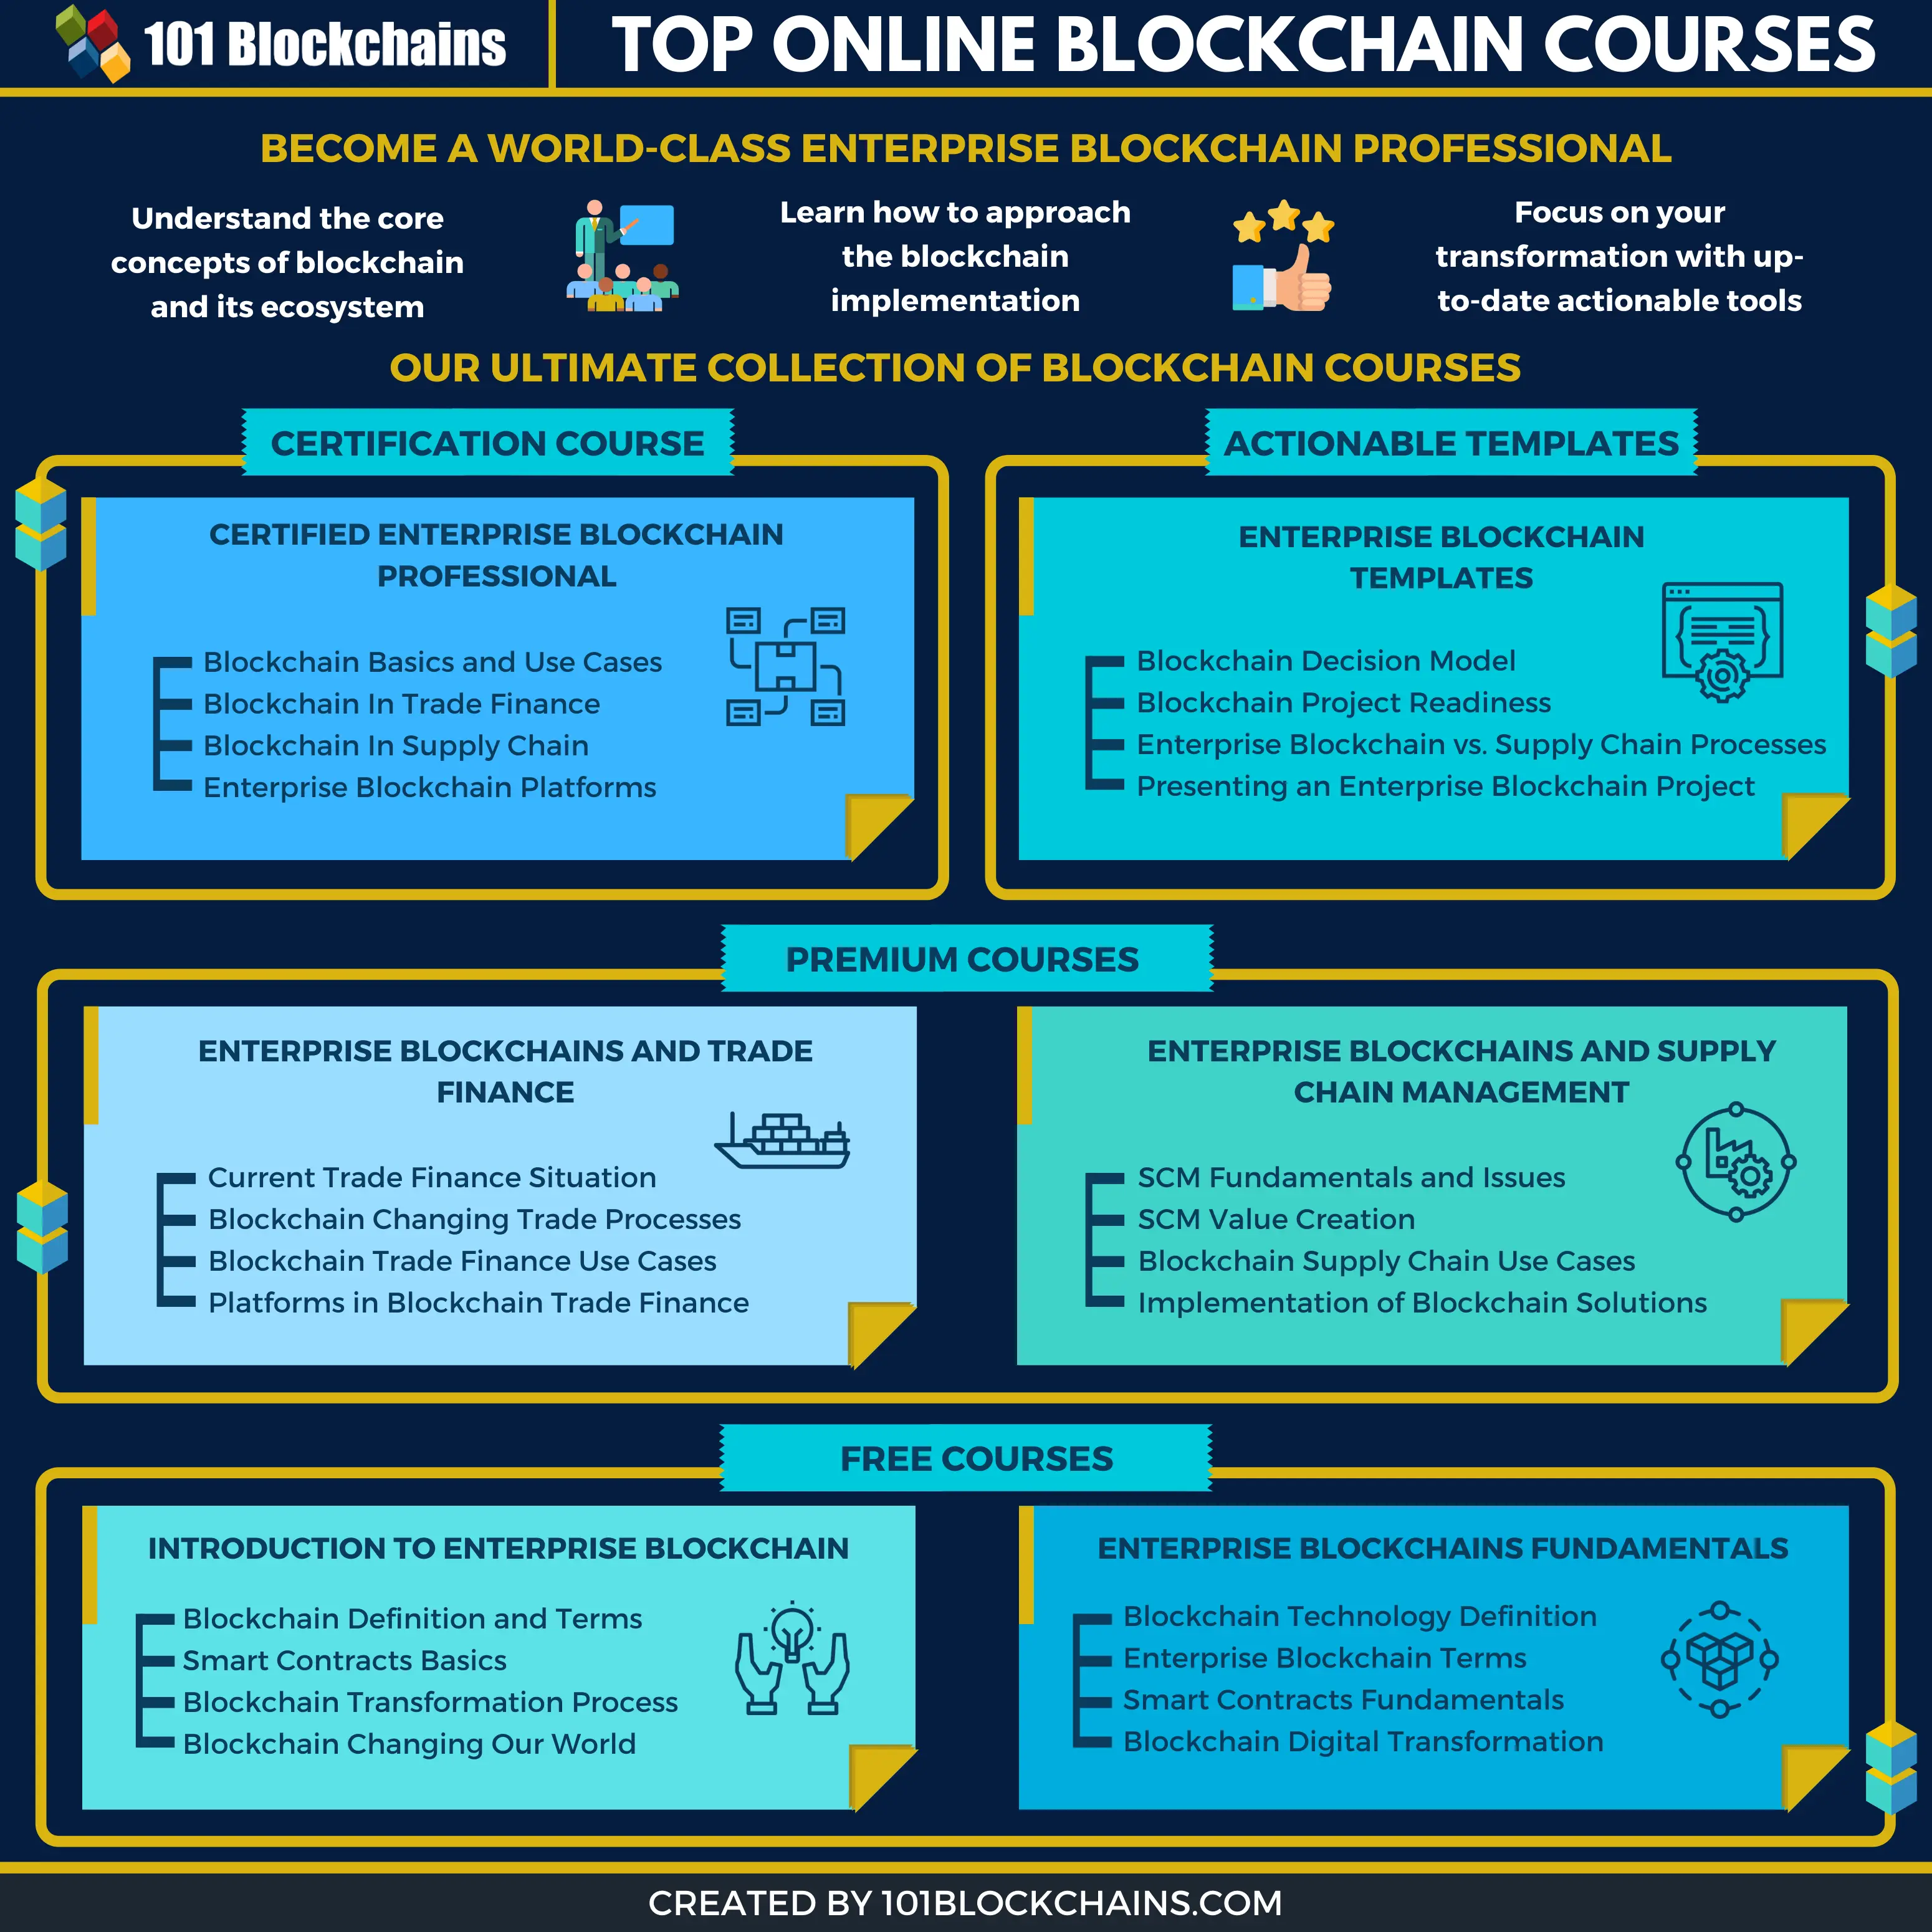 How to Use Blockchain Courses to Make your Career Best?